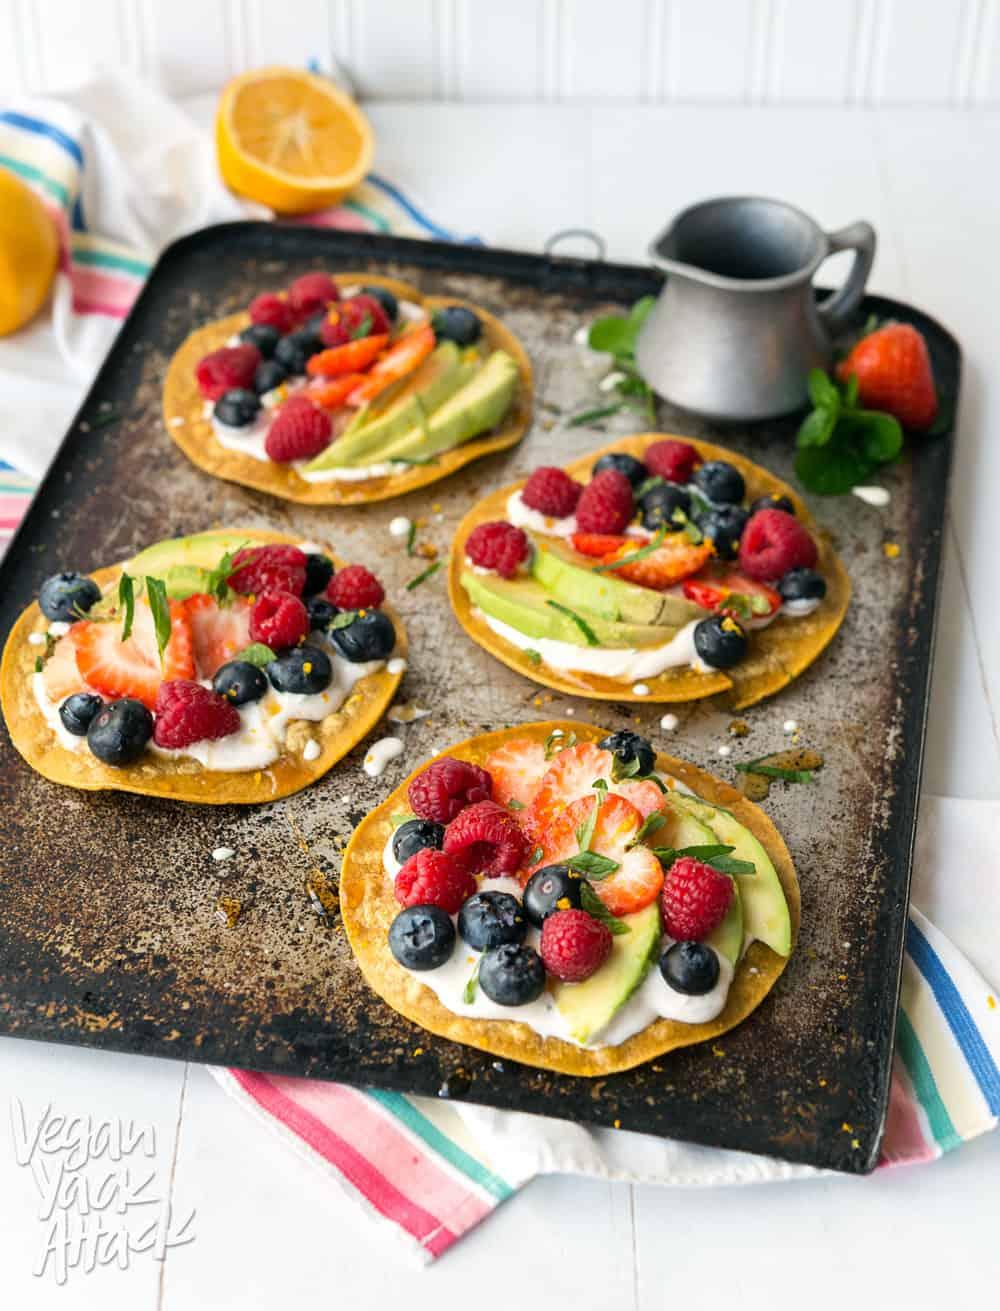 The Real Food Academy Miami crispy tostada with fresh berries recipe.